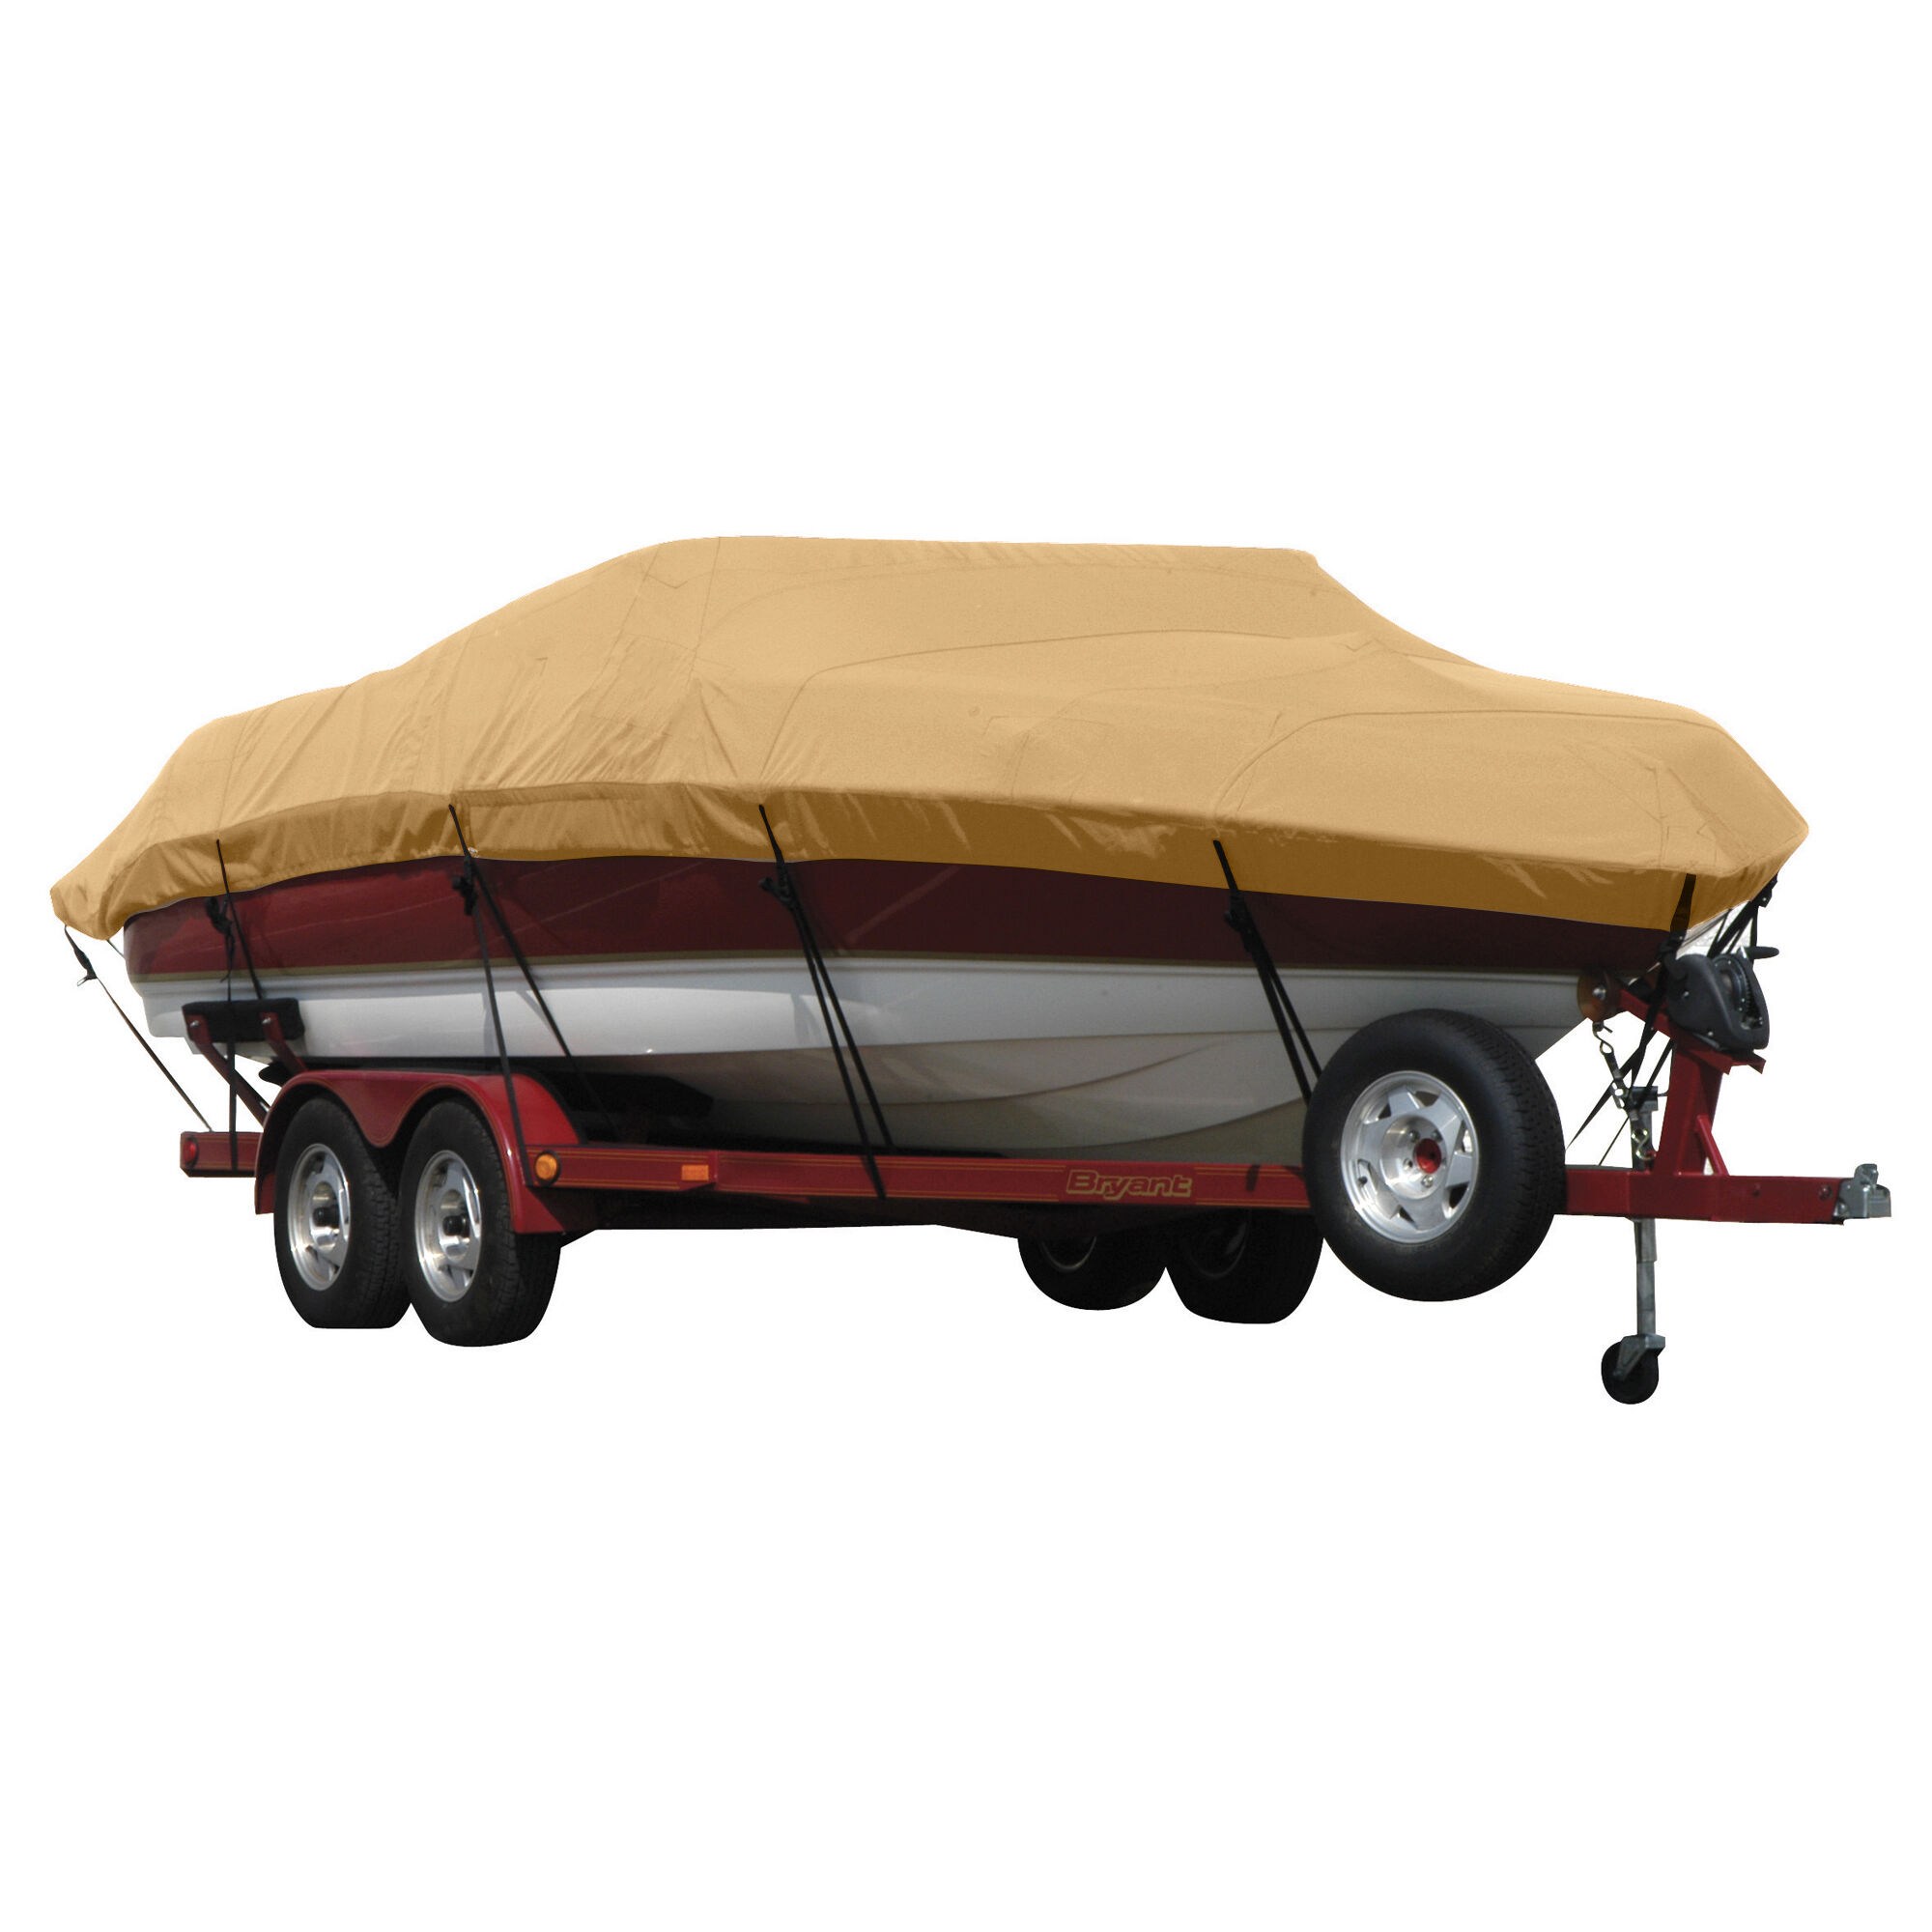 Covermate Exact Fit Sunbrella Boat Cover for Bayliner Classic 2252 Cp Classic 2252 Cp Cuddy Hard Top I/O. Toast